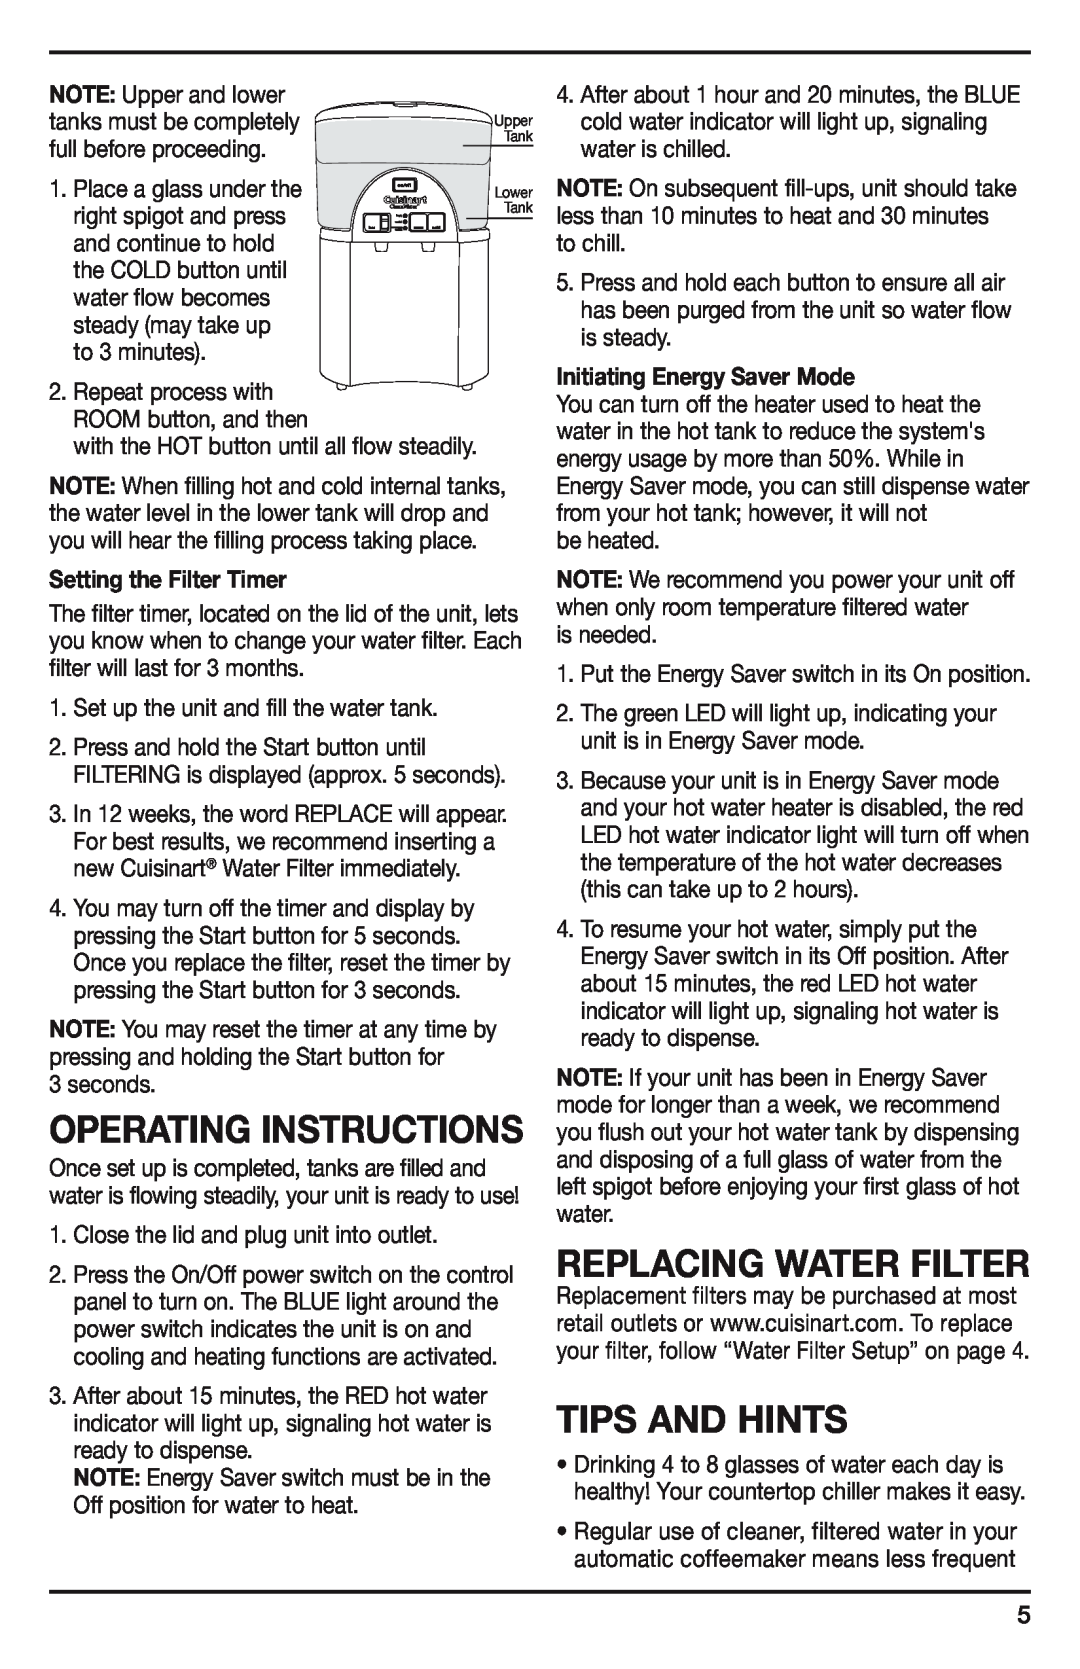 Cuisinart WCH-1500A manual Replacing Water Filter, Tips And Hints, Operating Instructions, Setting the Filter Timer 